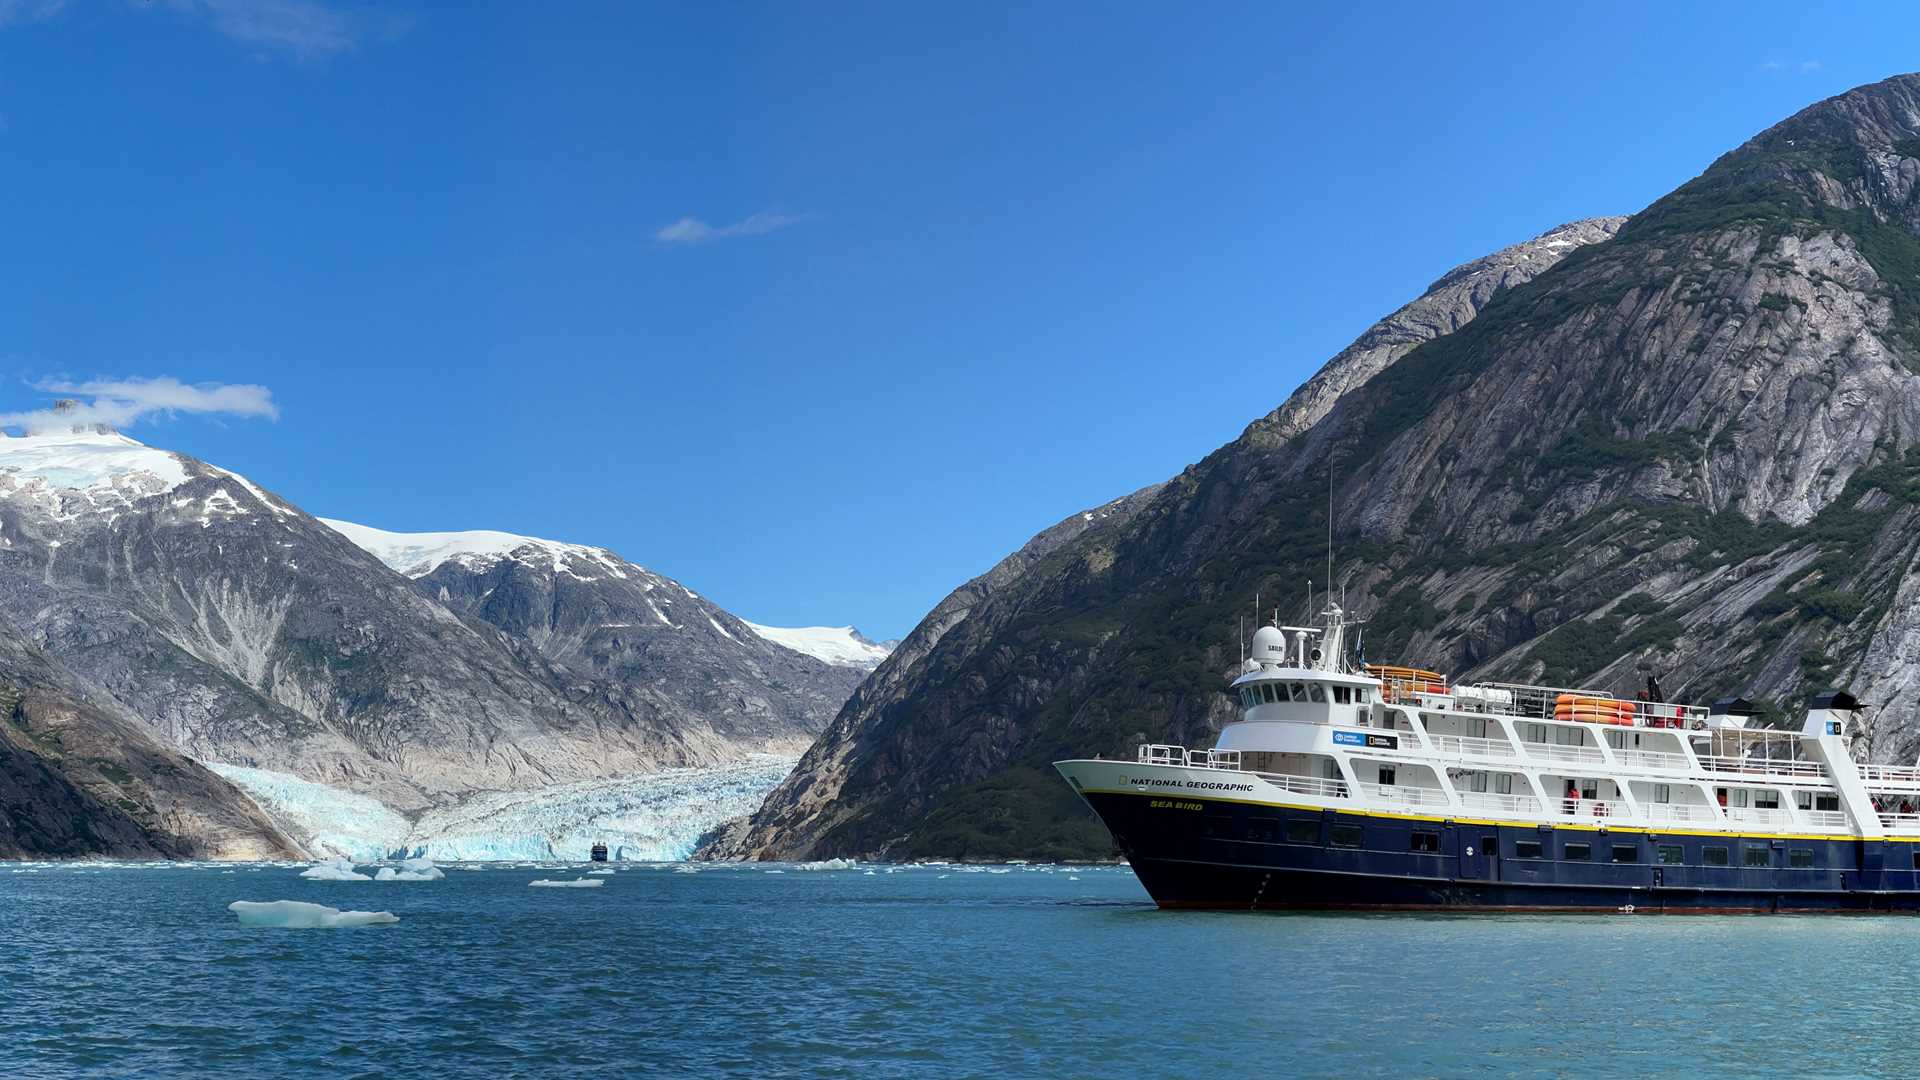 Tracy Arm-Fords Terror Wilderness